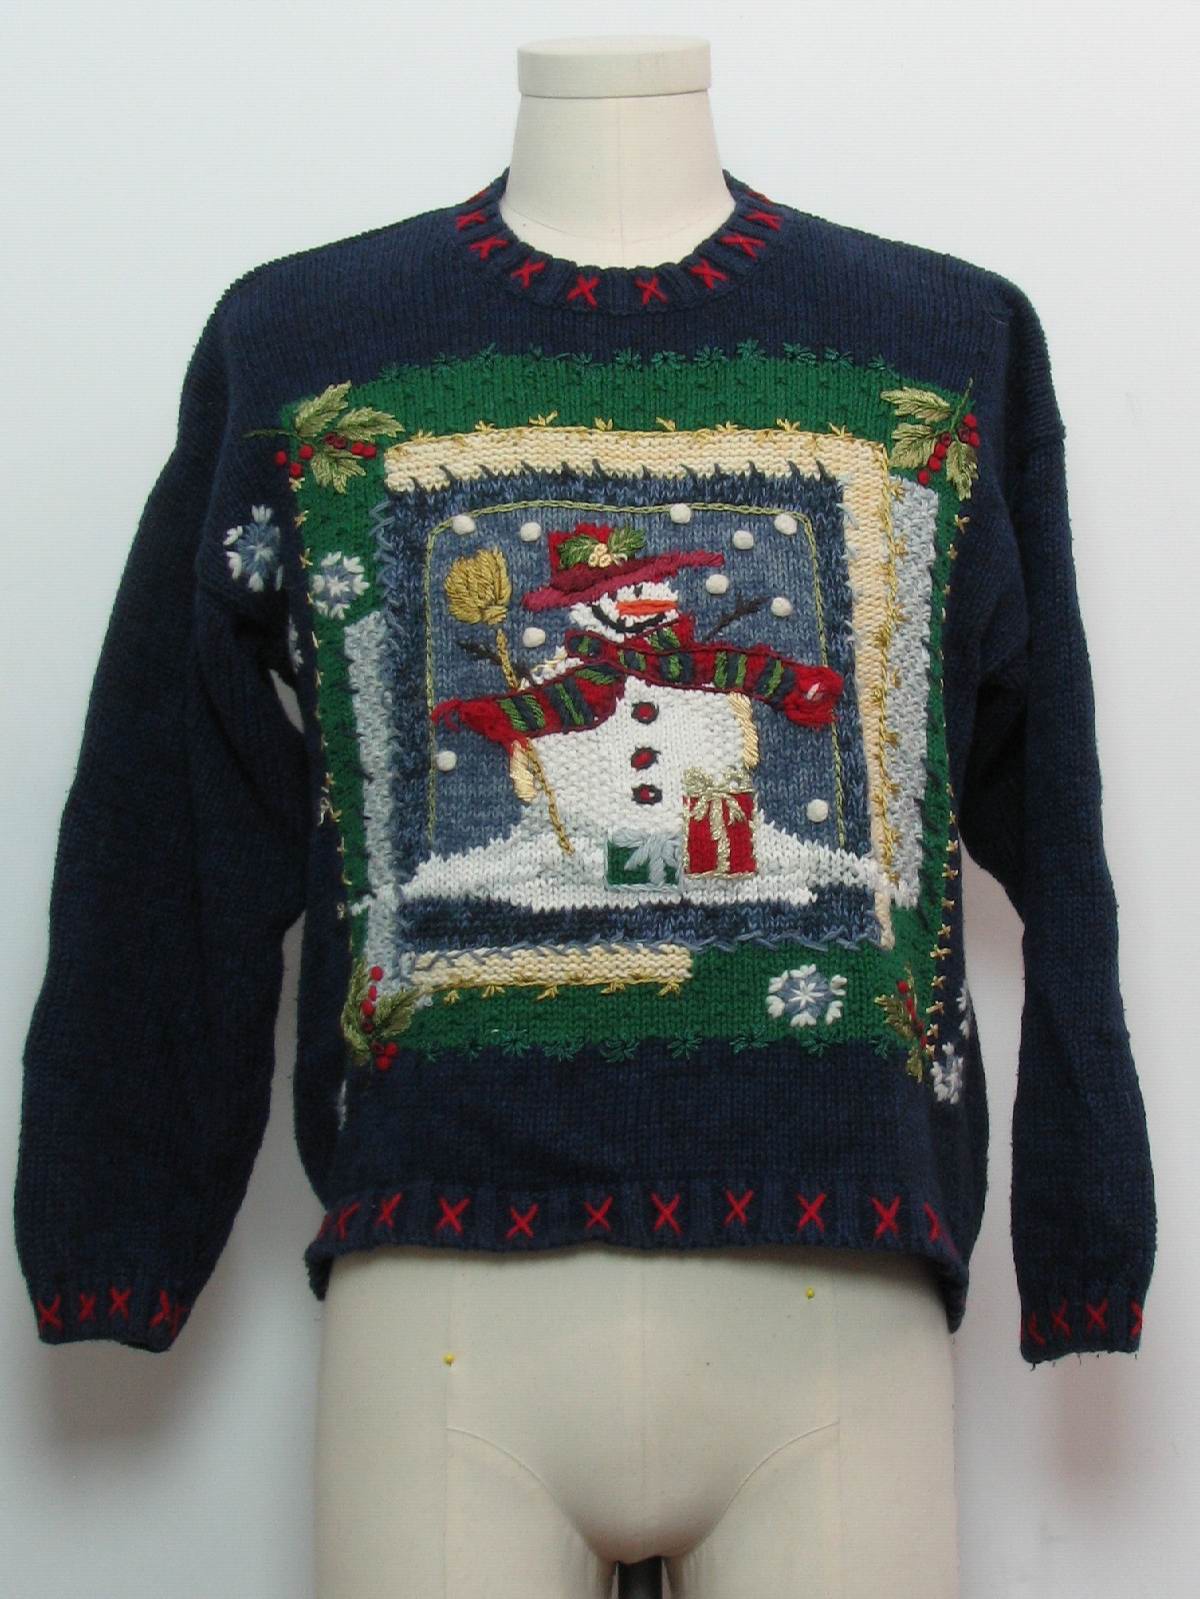 Womens Ugly Christmas Sweater: -Casual Corner Annex- Womens blue ...